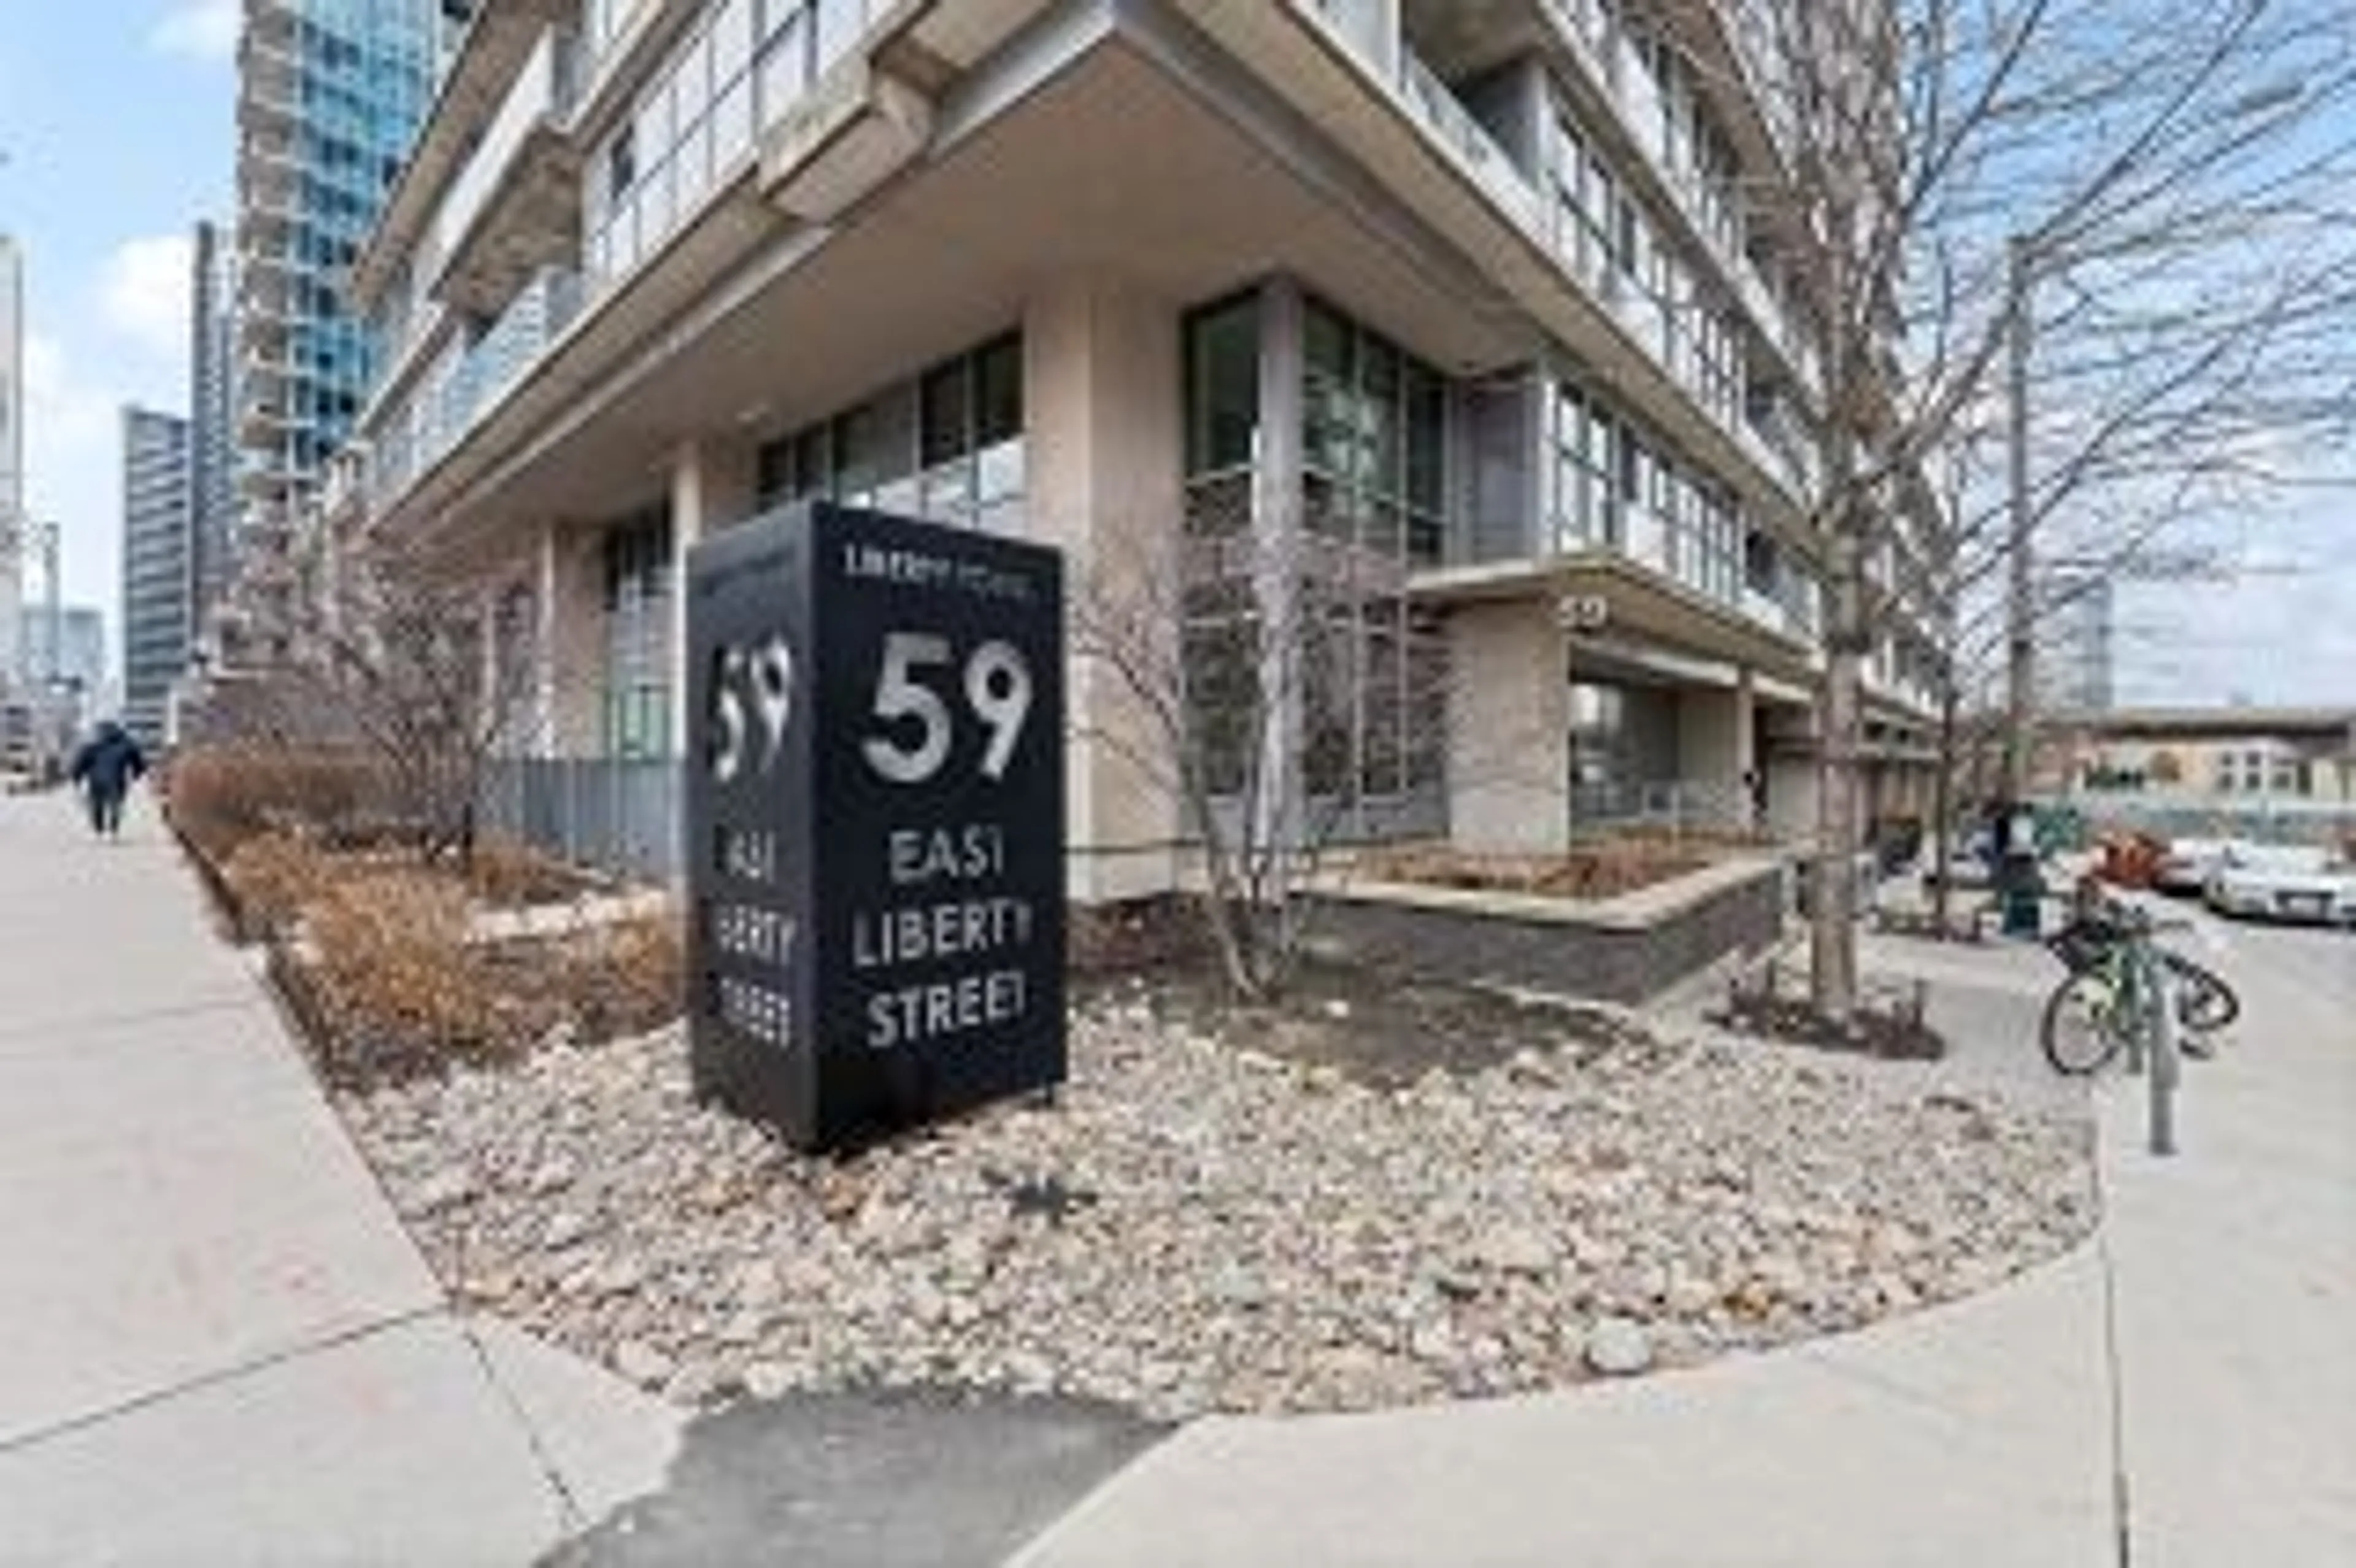 A pic from exterior of the house or condo for 59 East Liberty St #309, Toronto Ontario M6K 3R1